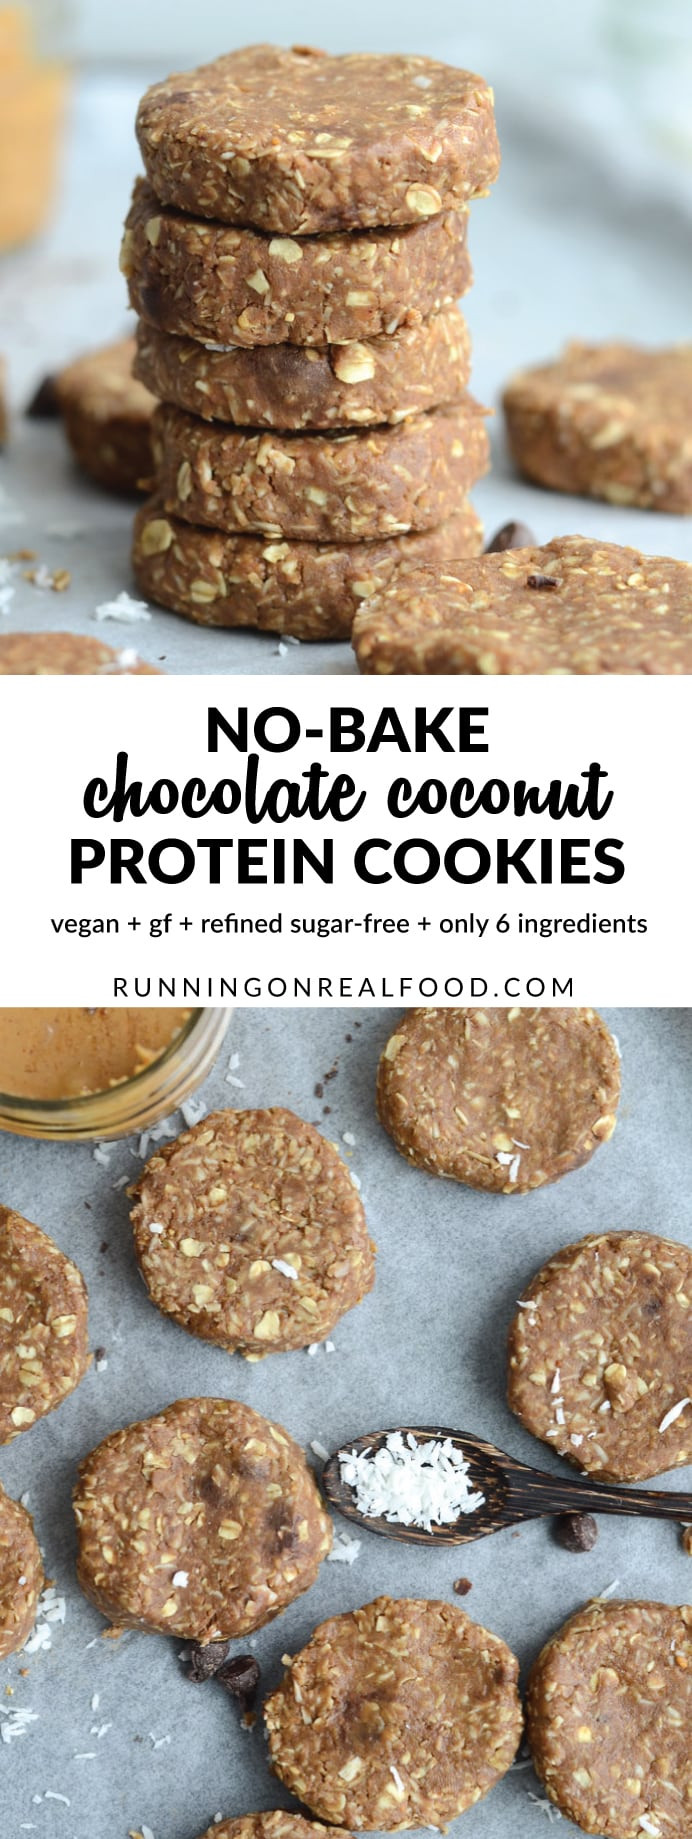 No Bake Protein Cookies
 Chocolate Coconut Protein Cookies No Bake Vegan ly 6